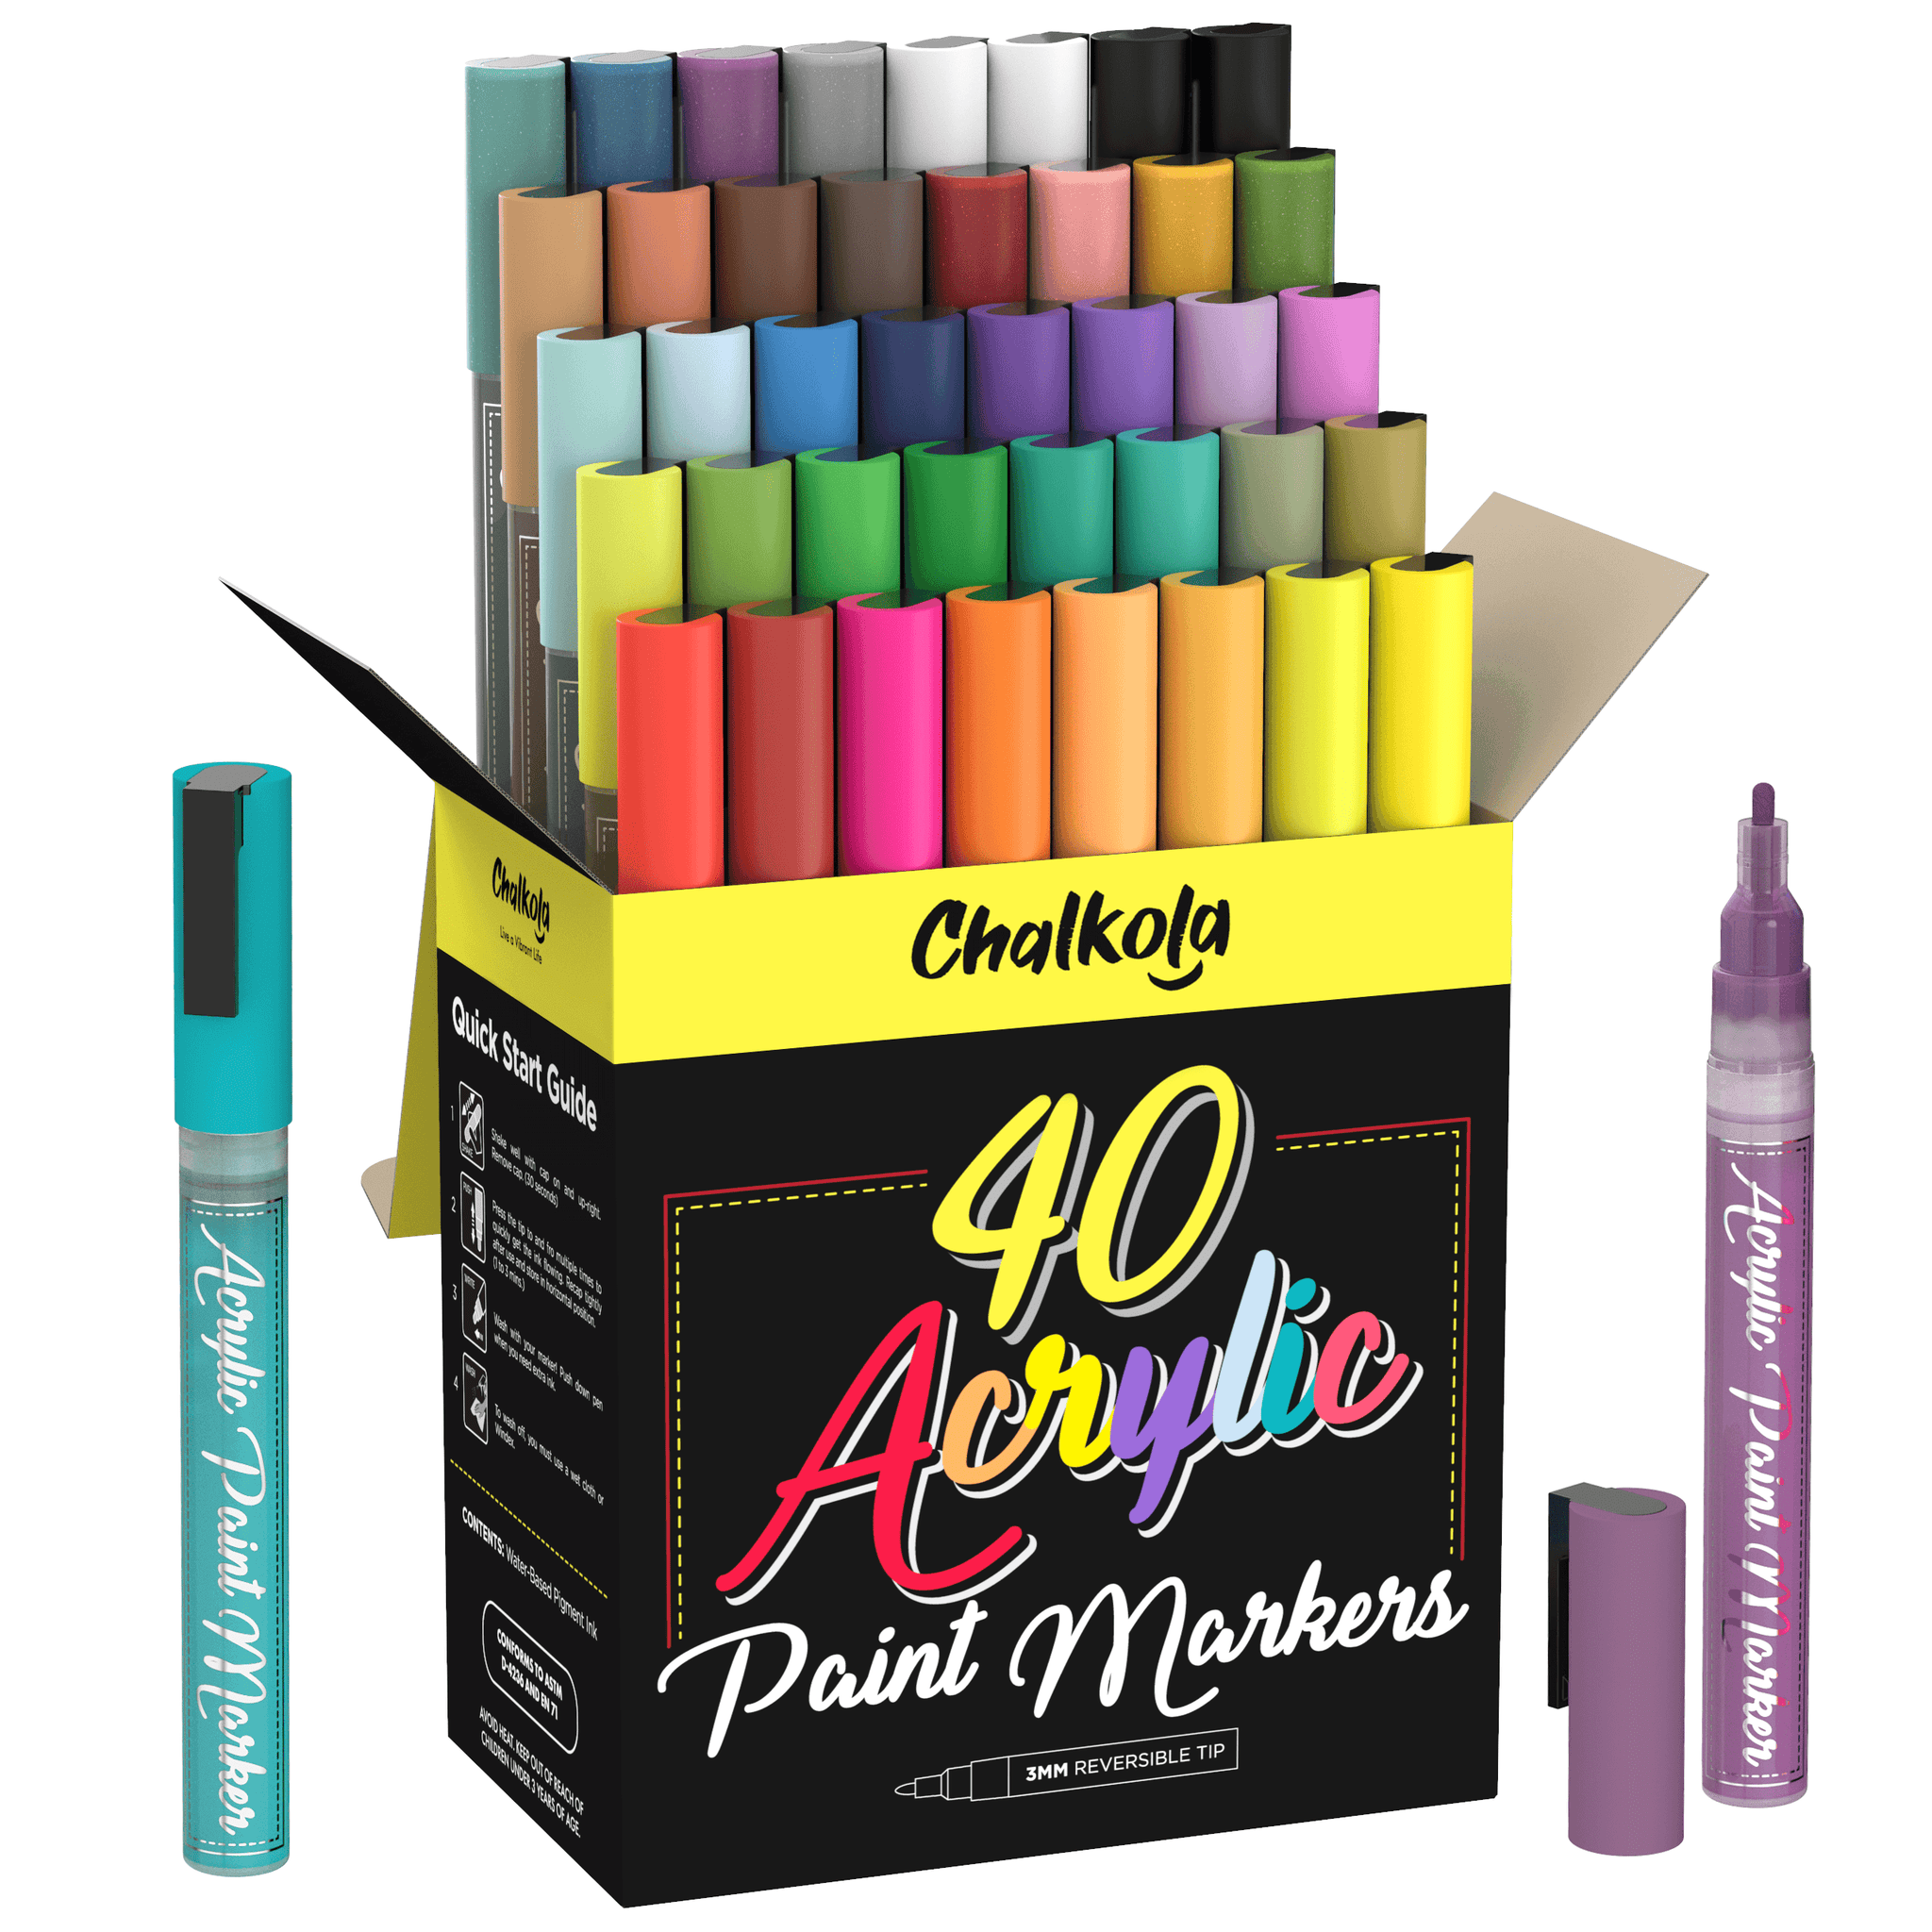 Chalkola Acrylic Paint Pens for Rock Painting, Stone, Ceramic, Glass, Wood,  Canvas - Set of 20 Colors, 1mm Extra Fine Tip Water Based Paint Markers -  Yahoo Shopping